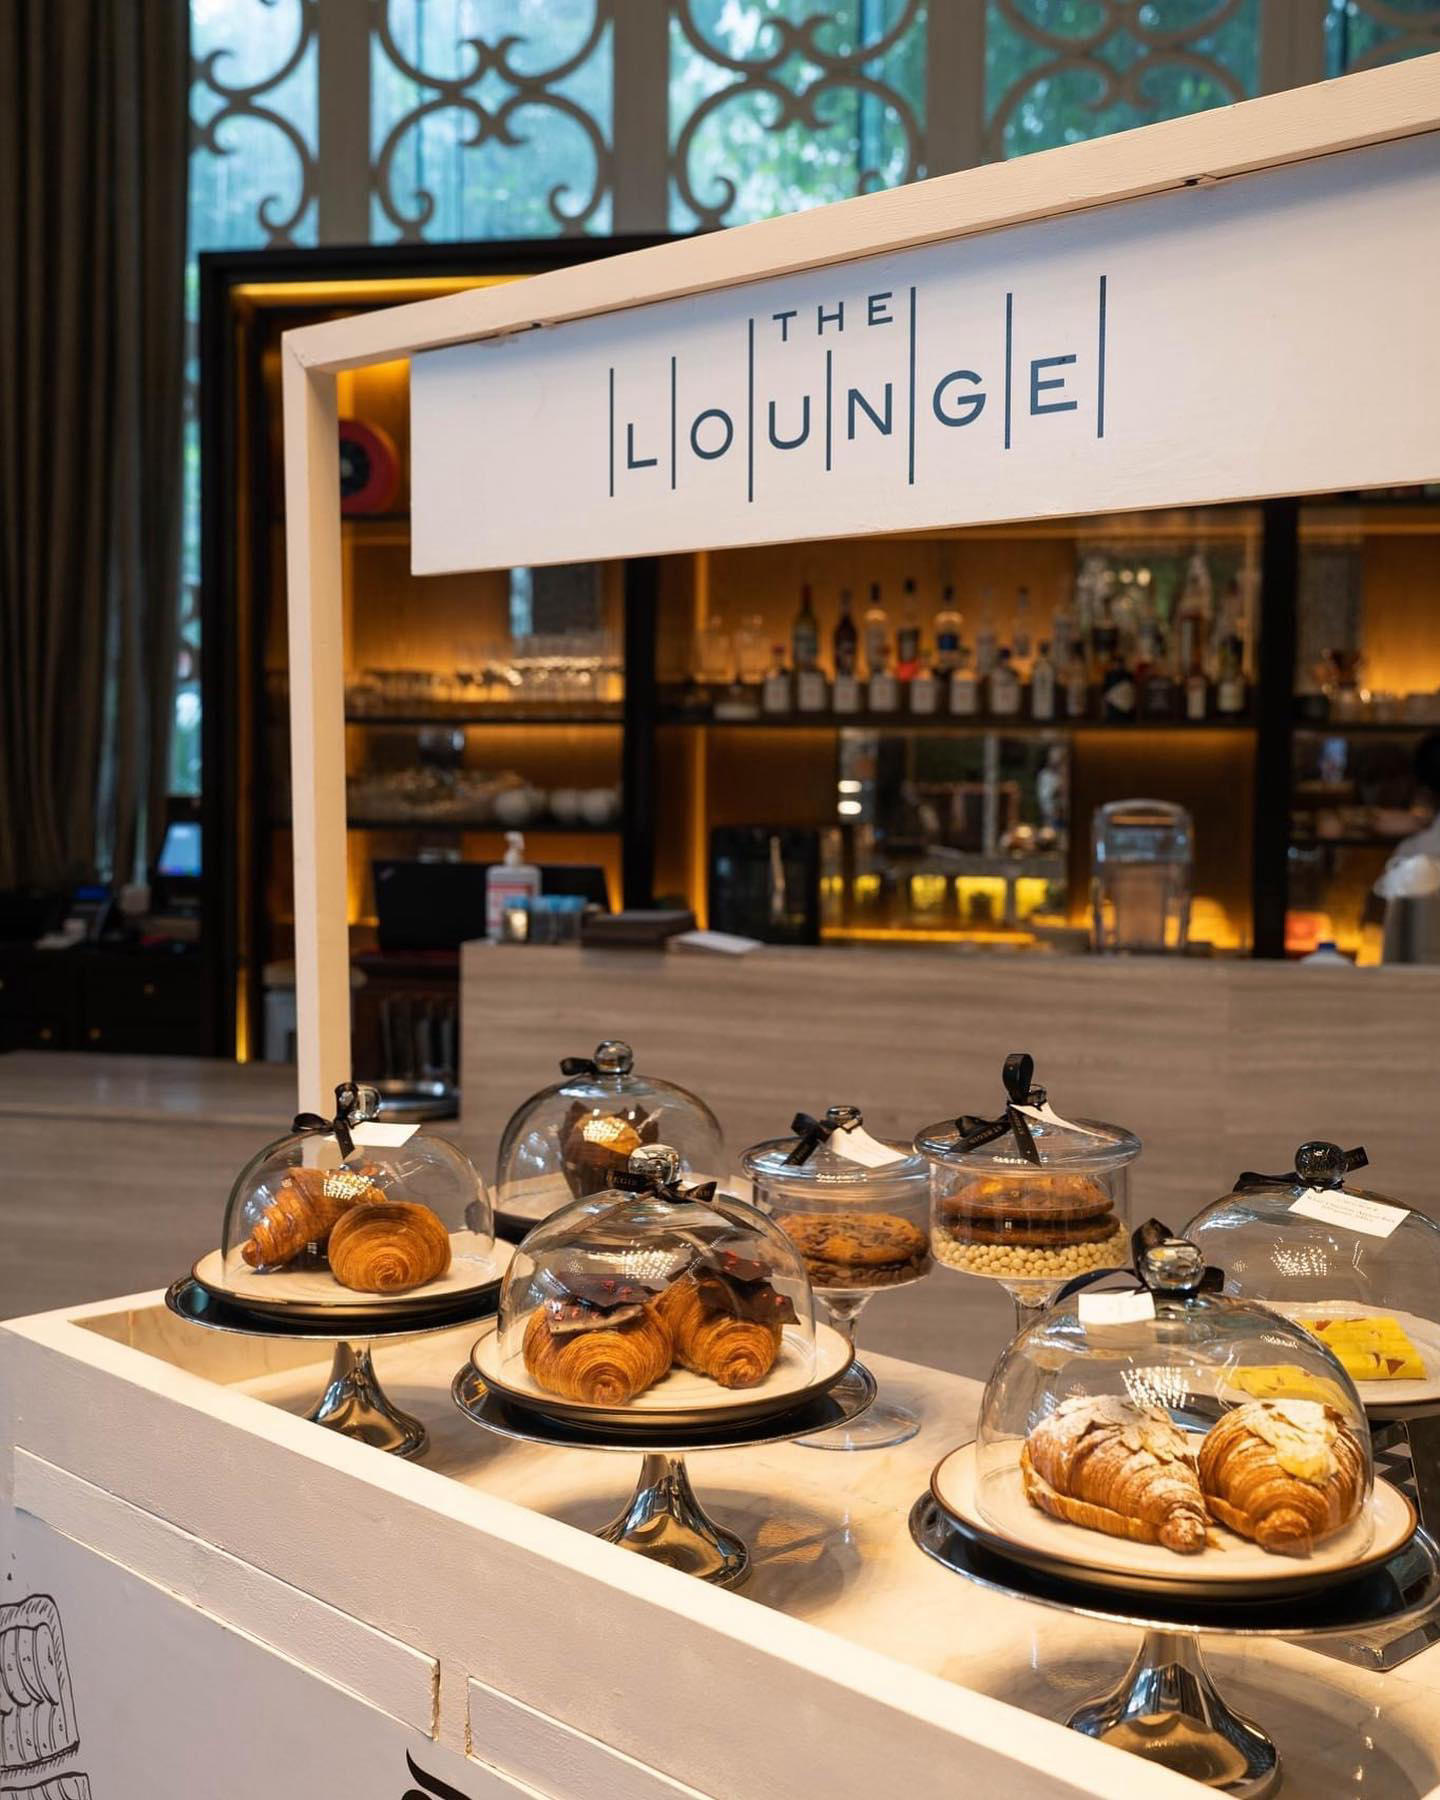 There’s nothing like the smell of freshly baked pastry to start your mornings at The Lounge